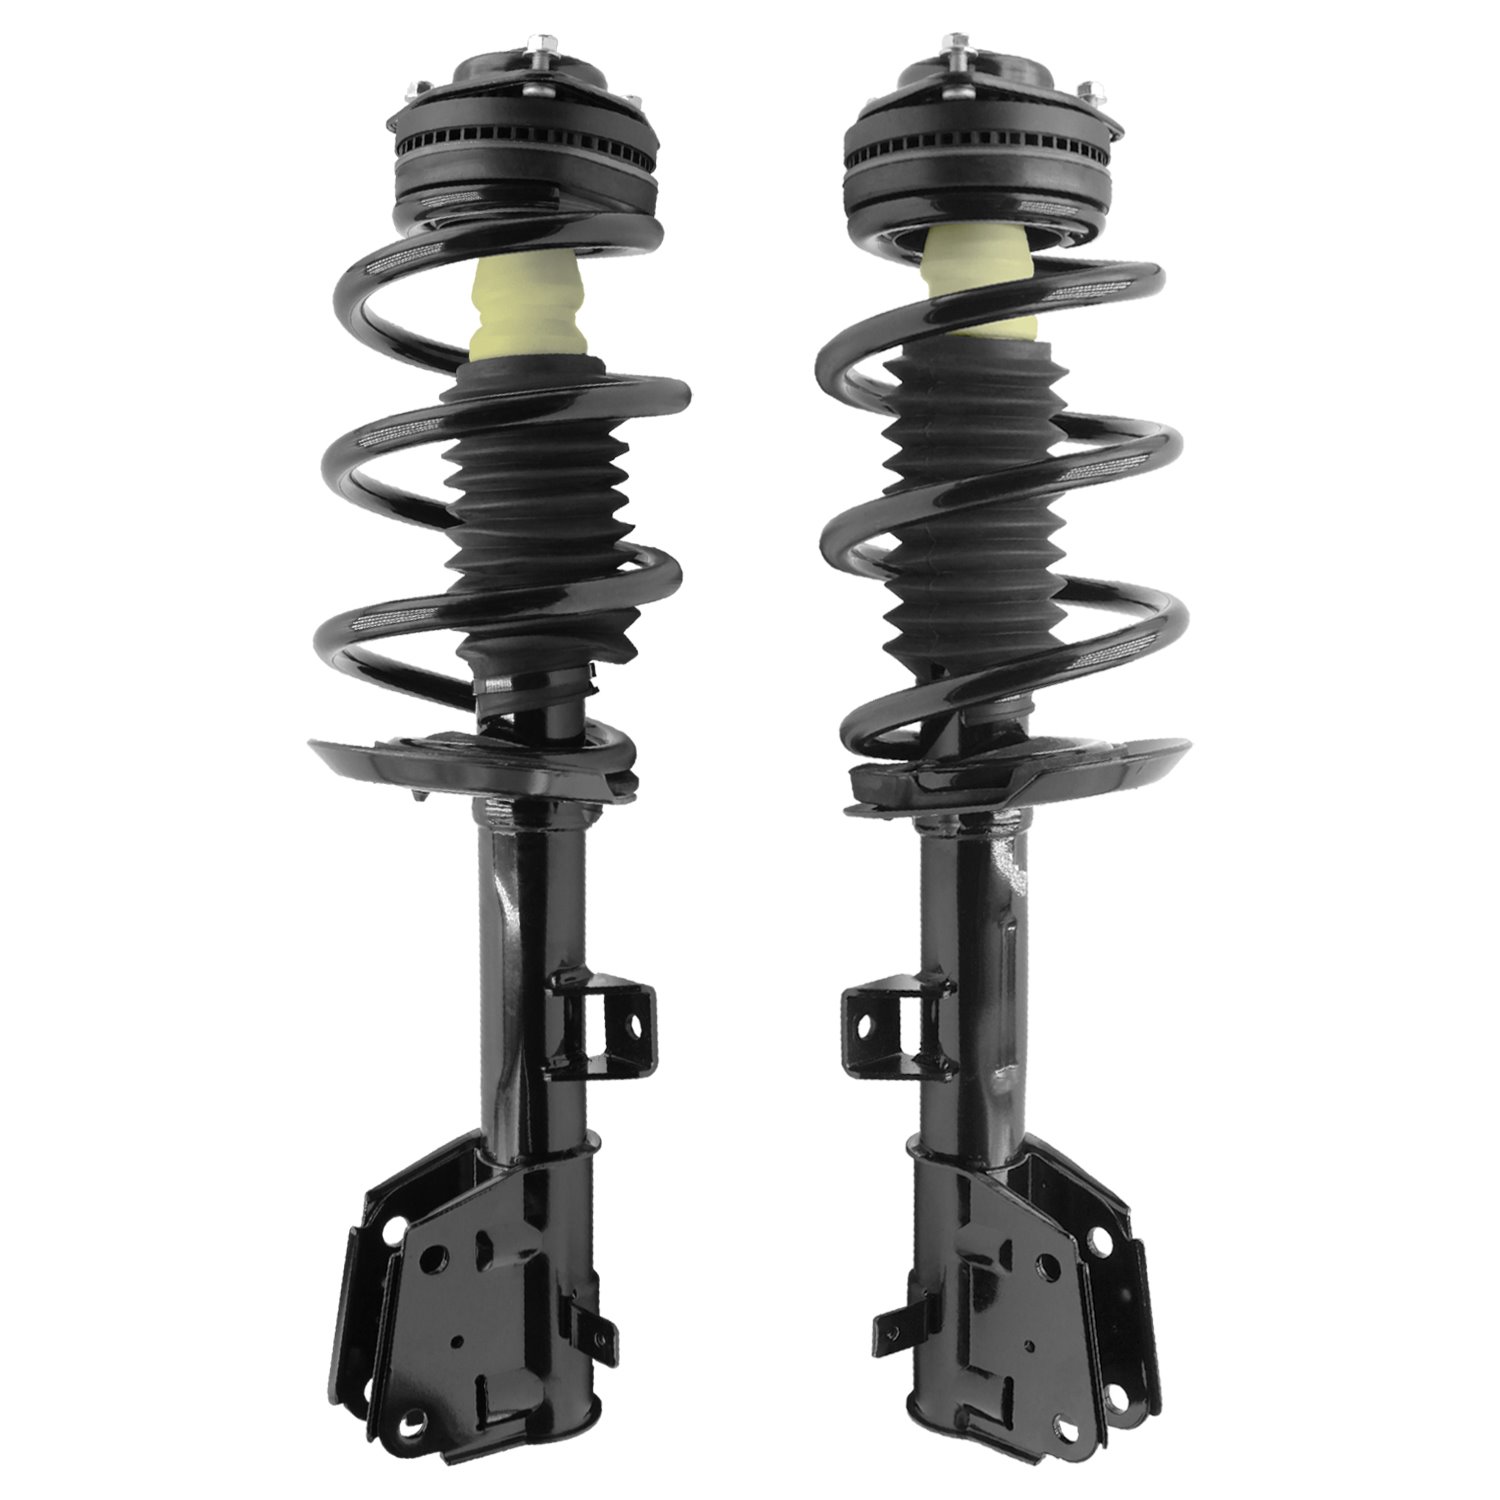 2-13683-13684-001 Front Suspension Strut & Coil Spring Assemby Set Fits Select Chrysler Pacifica